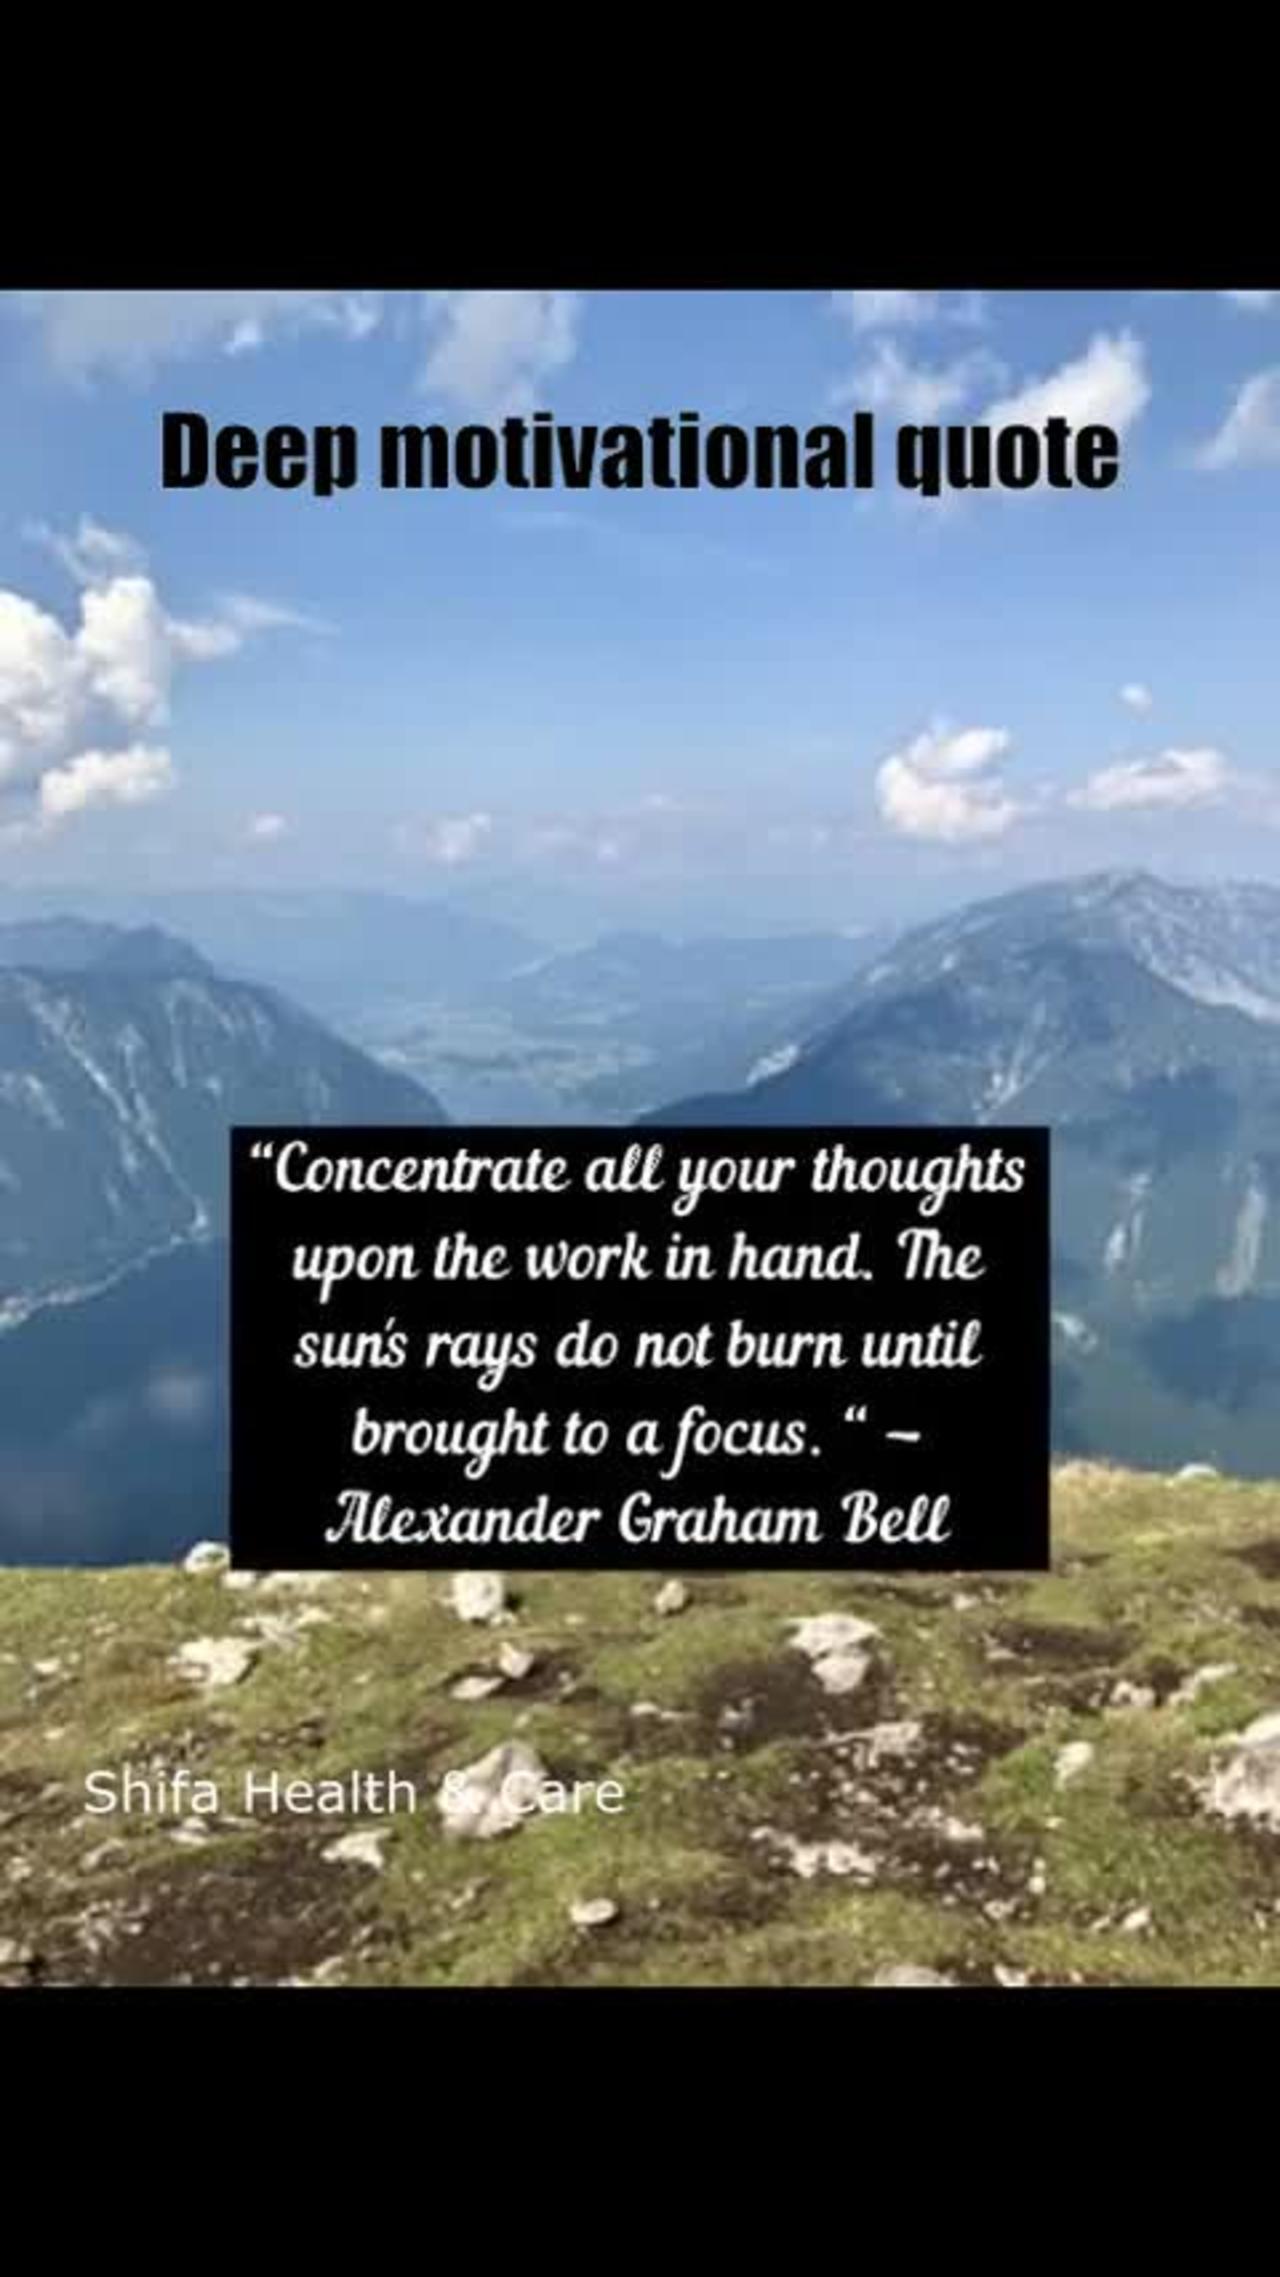 Concentrate all your thoughts upon the work in hand Alexander Graham Bell